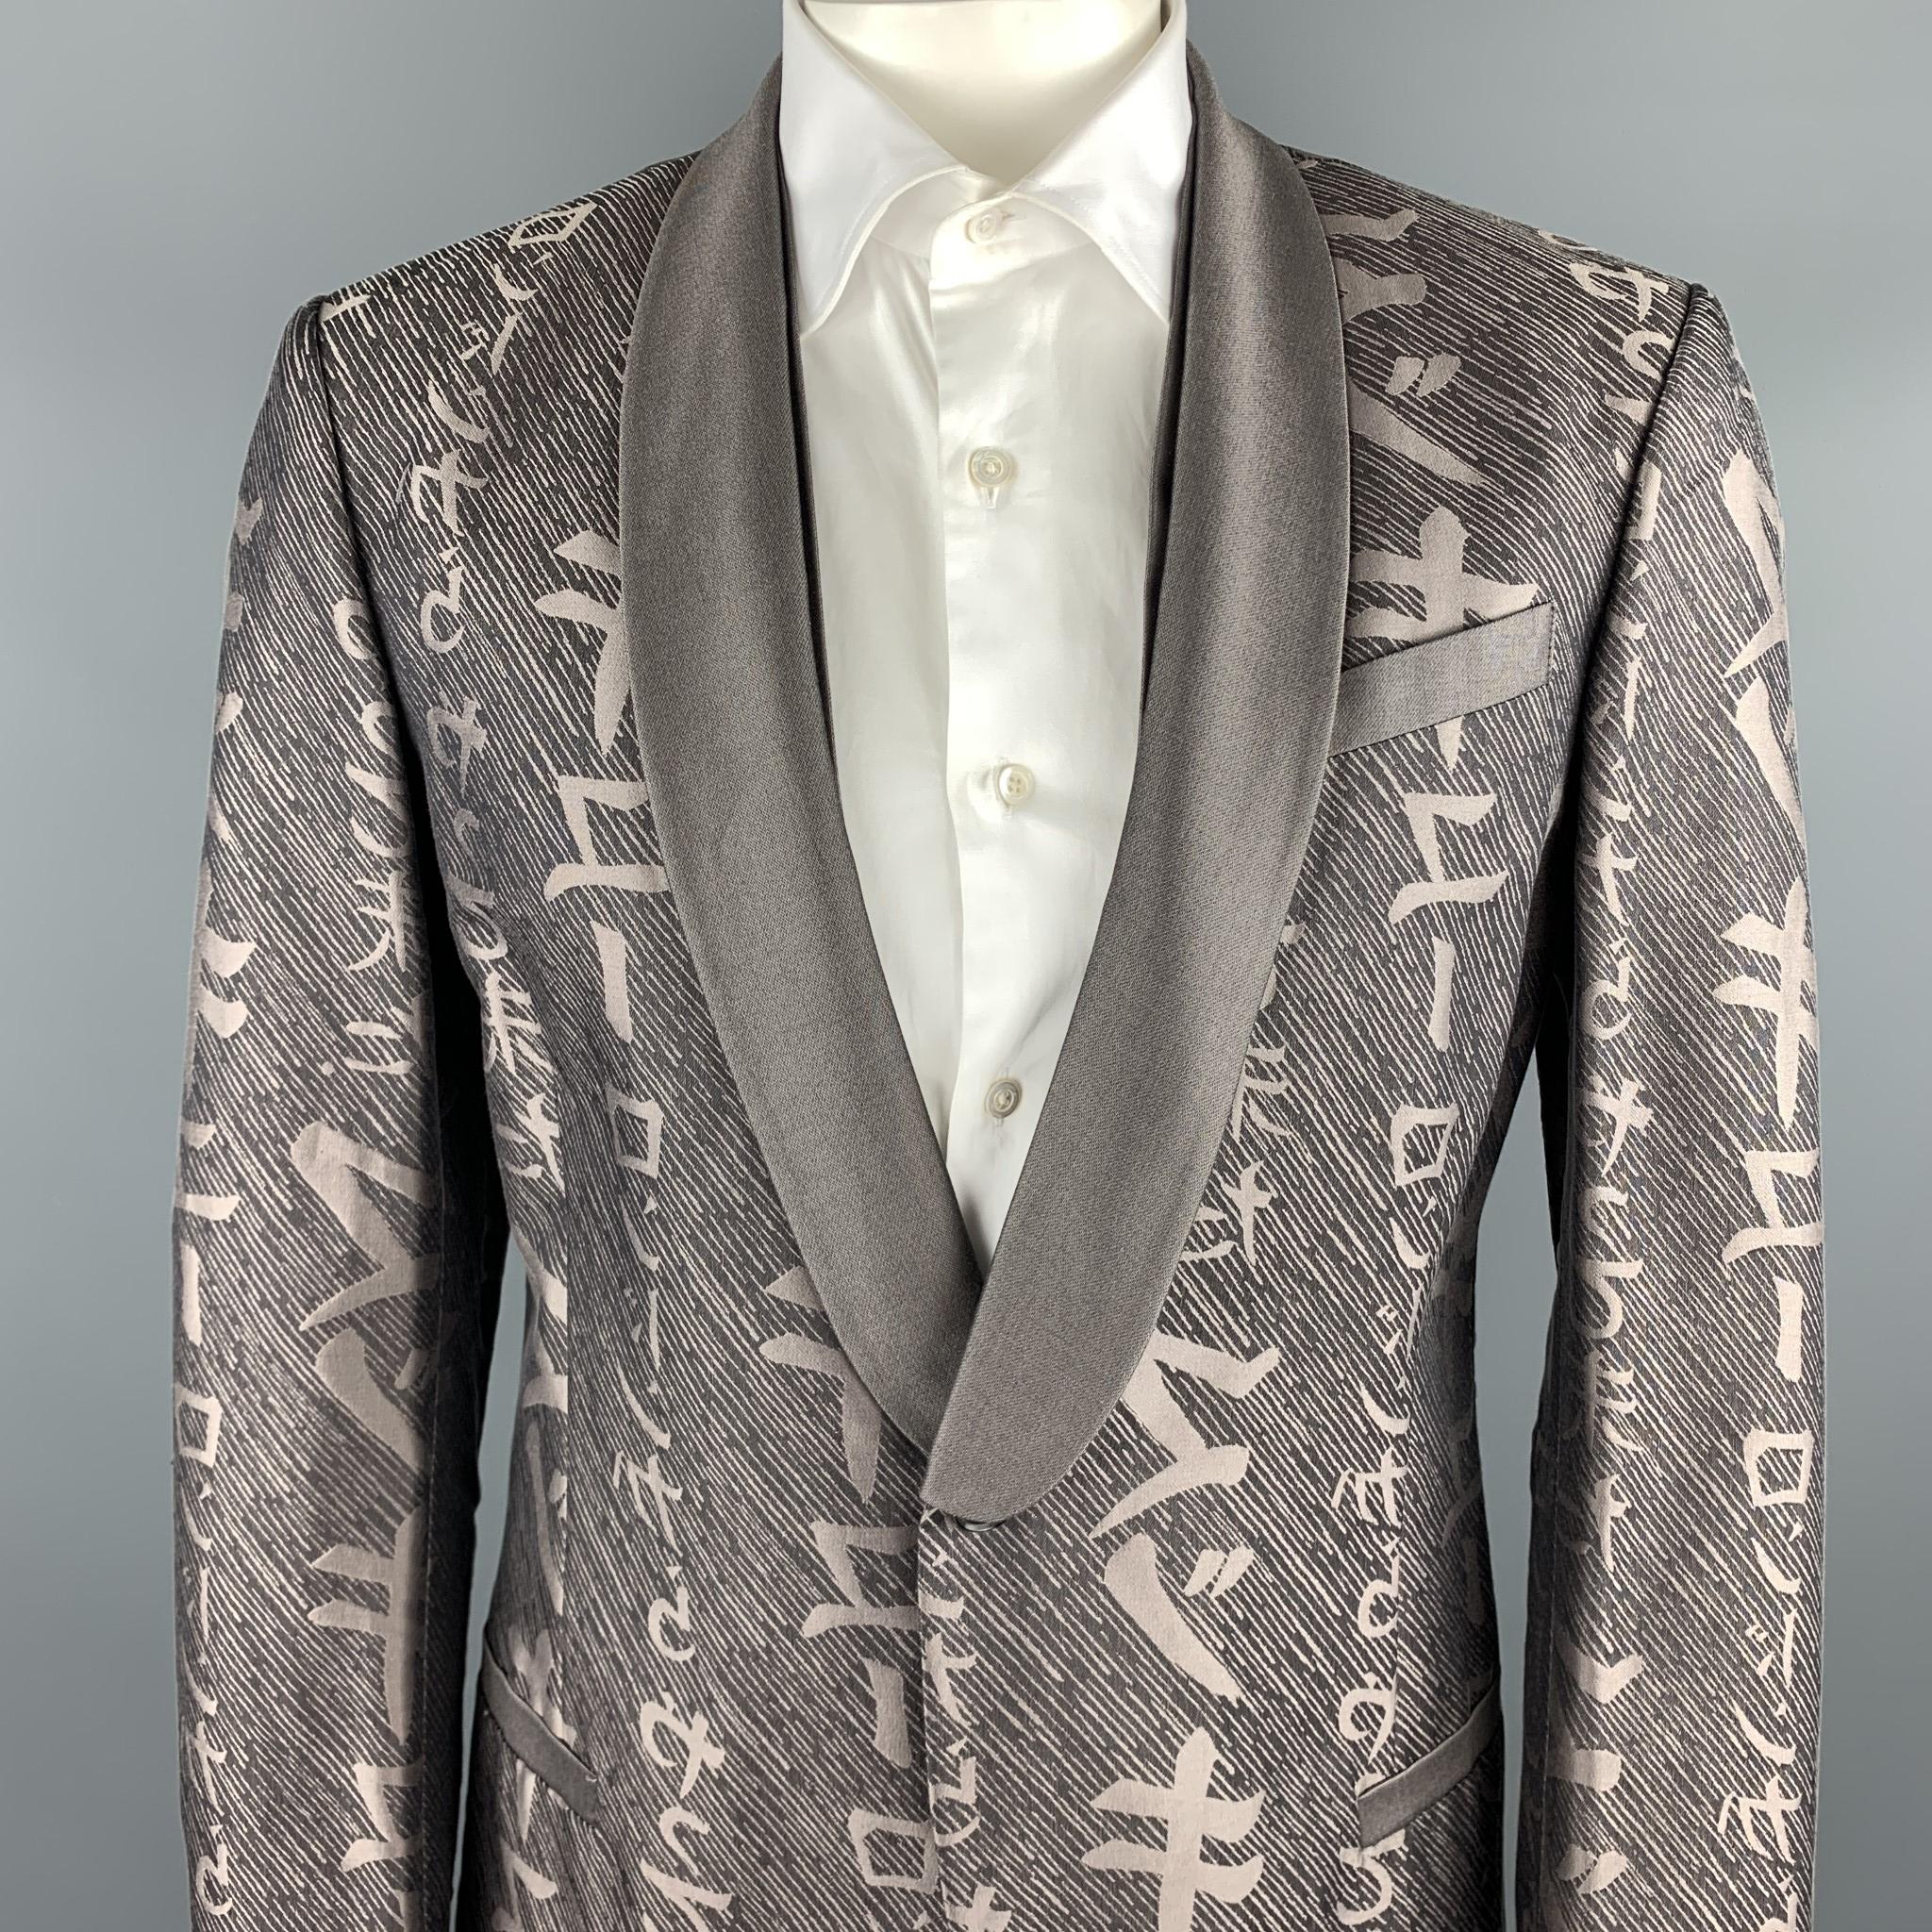 MCQ by ALEXANDER MCQUEEN sport coat comes in a taupe print cotton / silk featuring a shawl collar, slit pockets, and a single button closure. Made in Italy.

Excellent Pre-Owned Condition.
Marked: IT 54

Measurements:

Shoulder: 18 in. 
Chest: 42